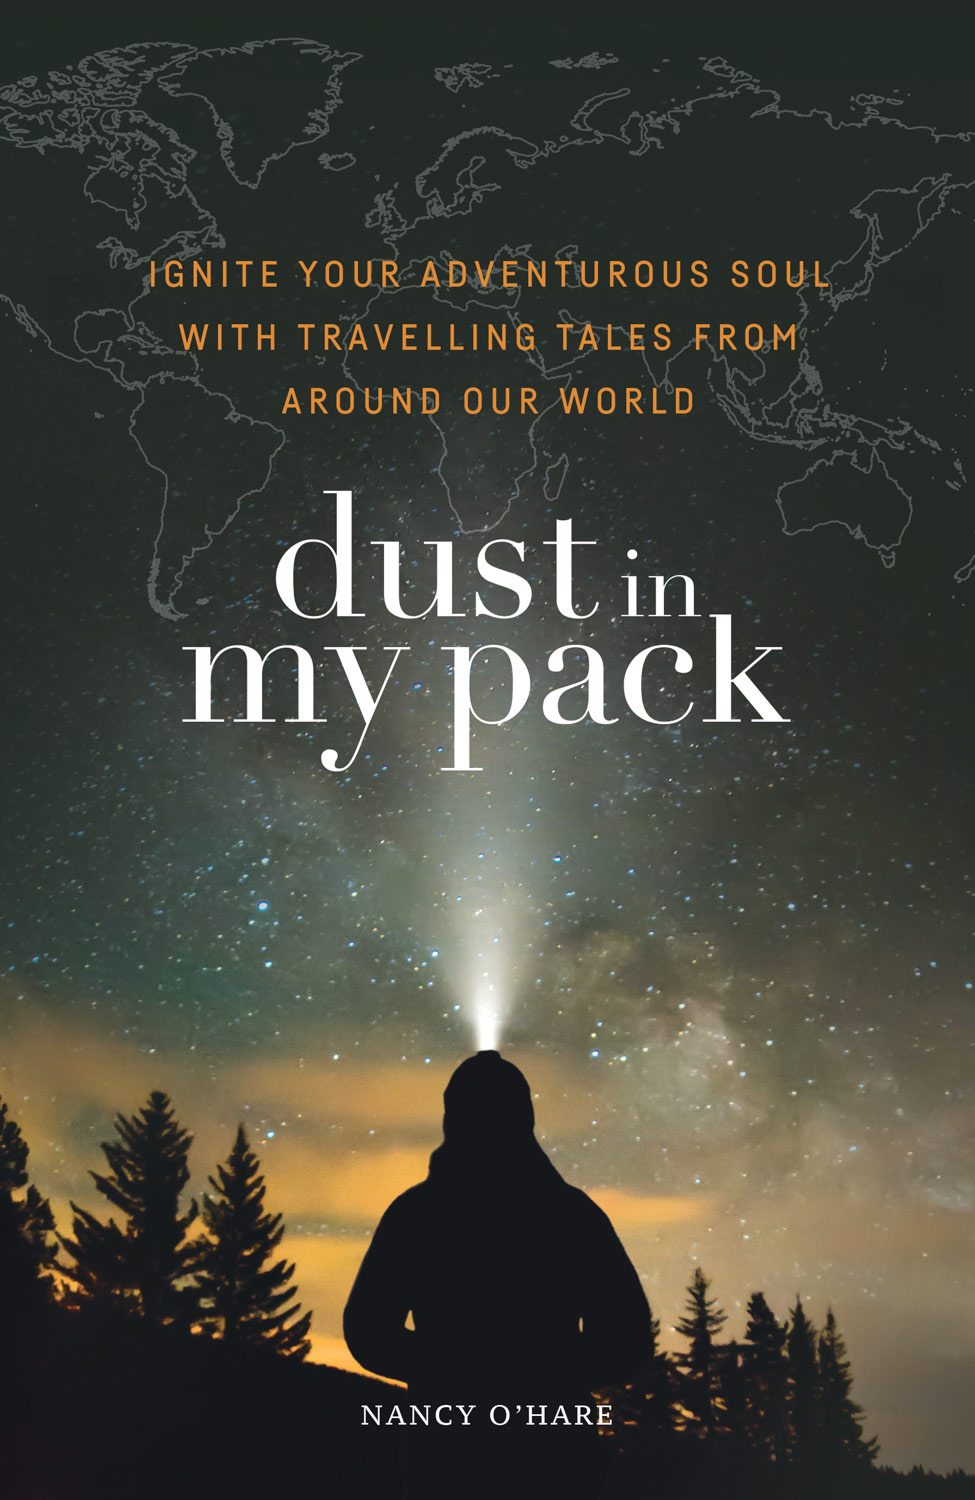 Dust-in-My-Pack-Adventure-Book